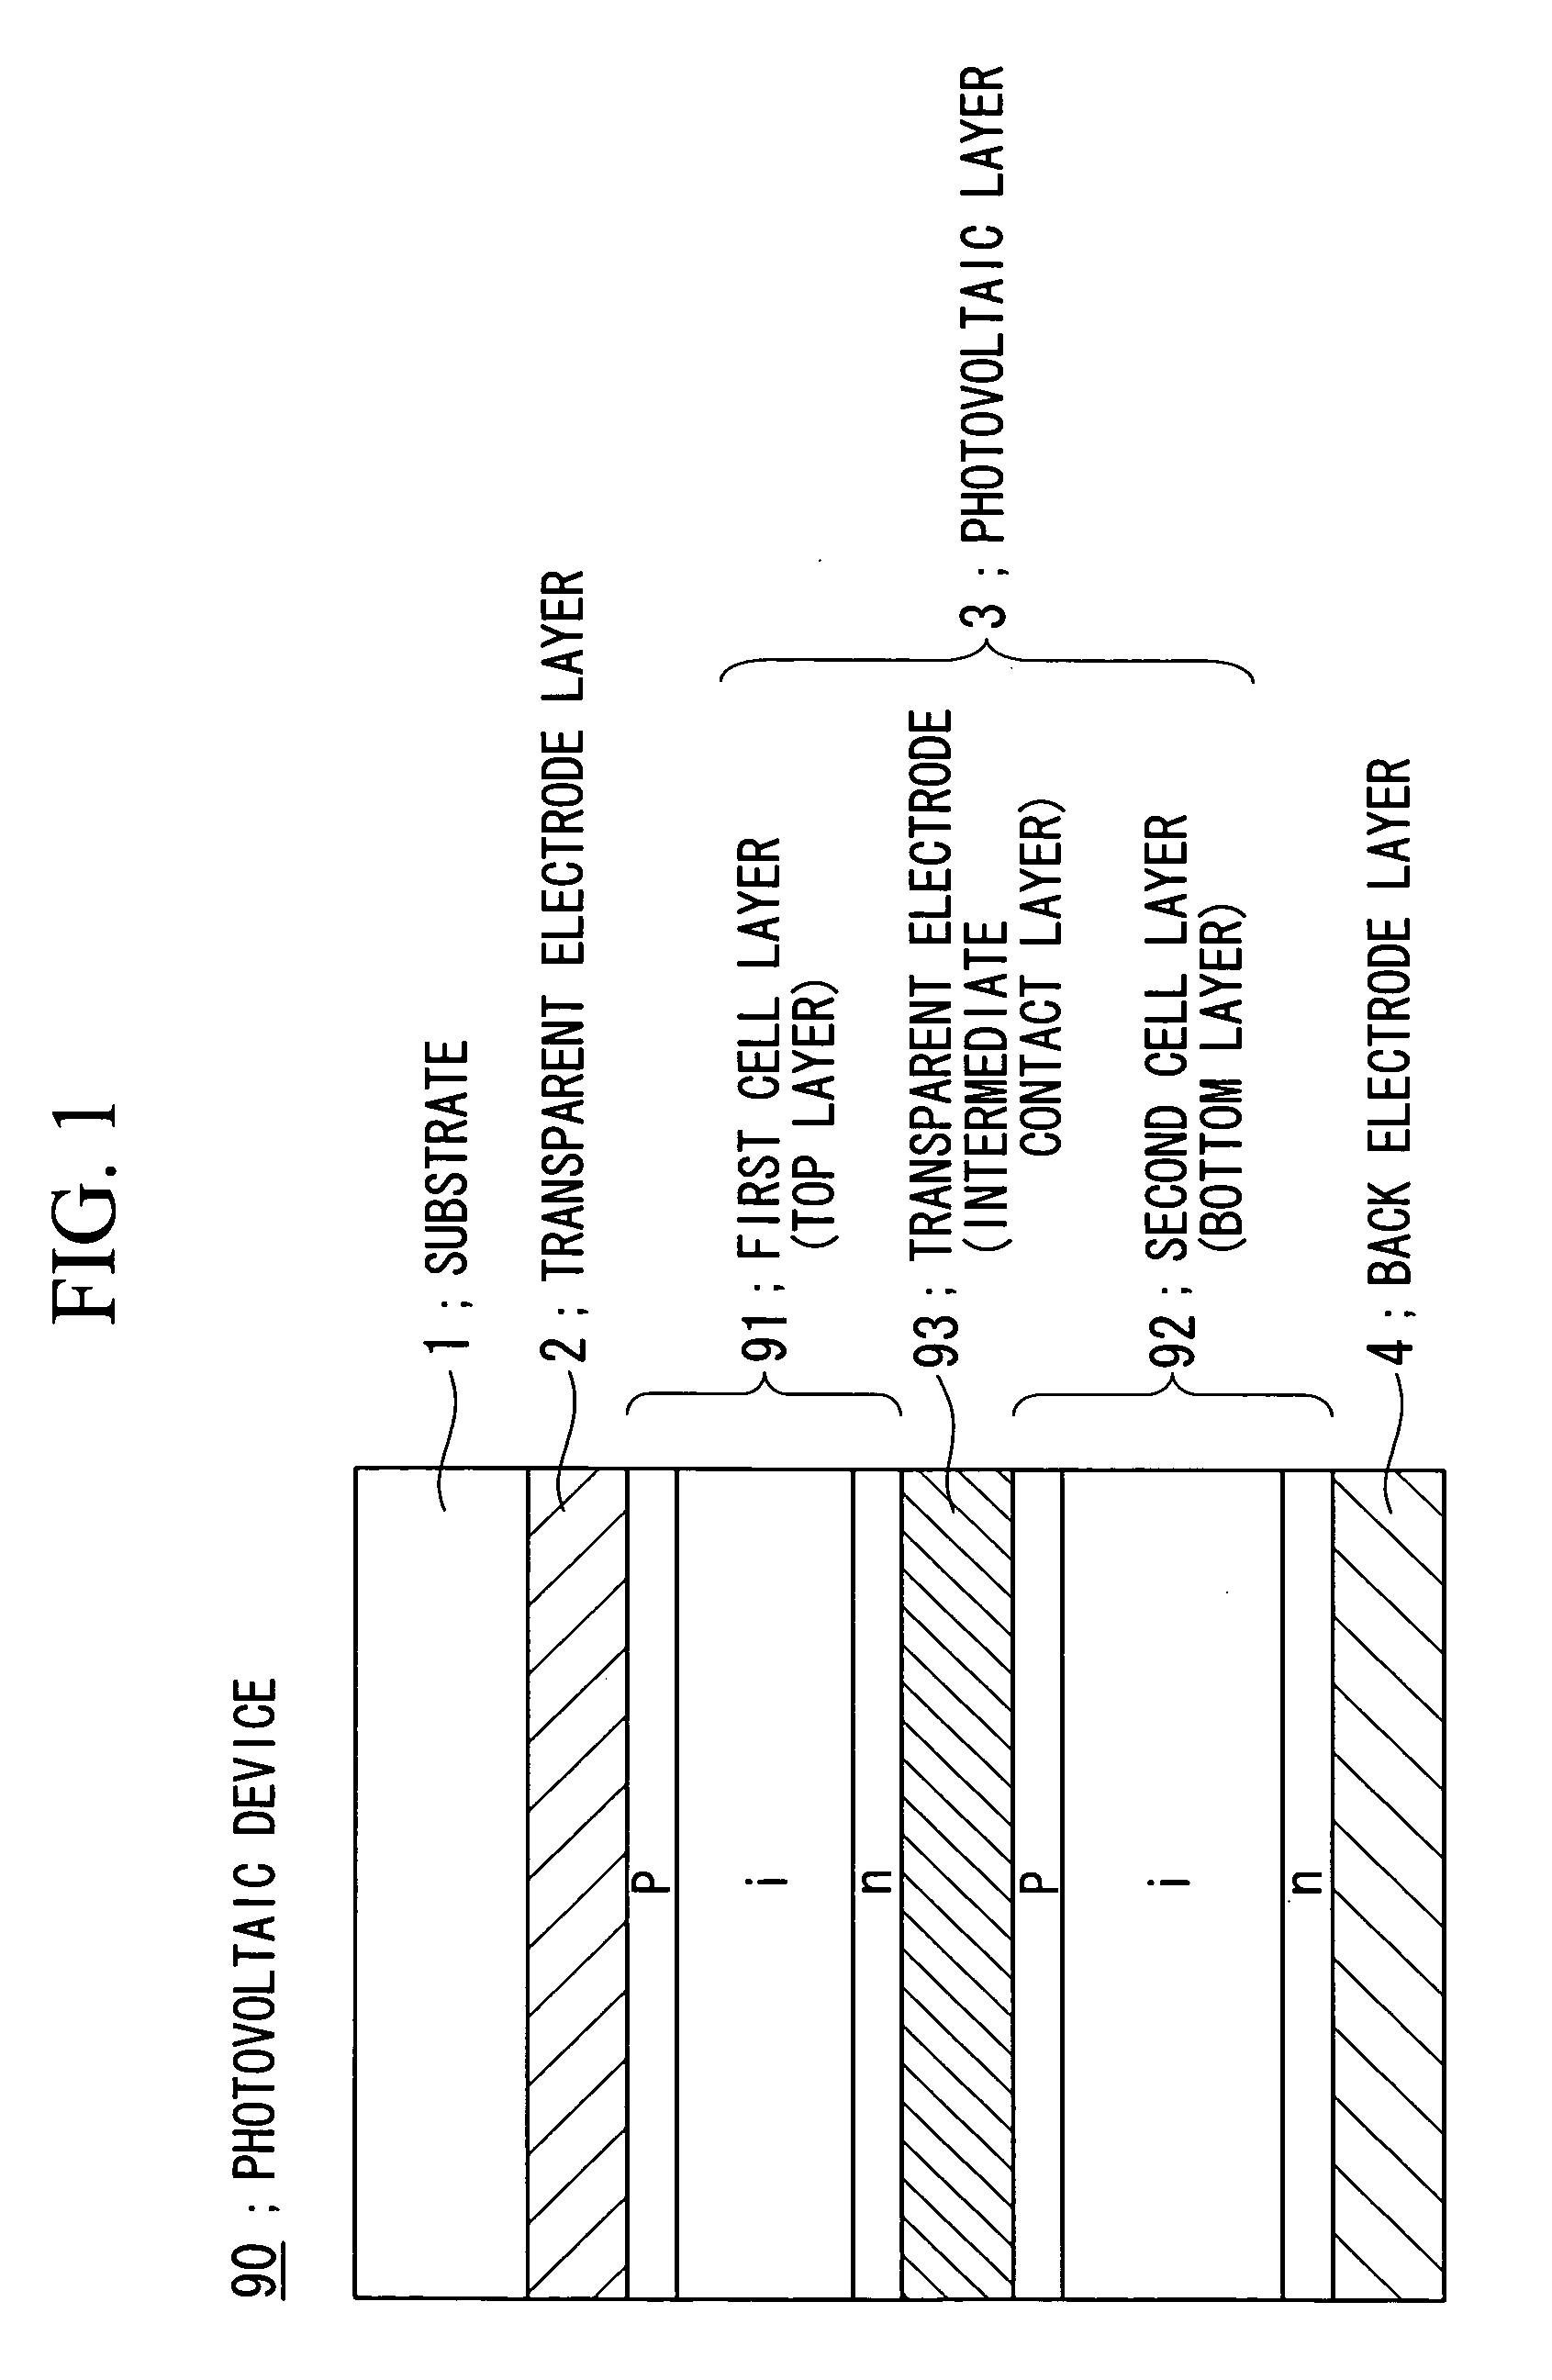 Photovoltaic device and process for producing same